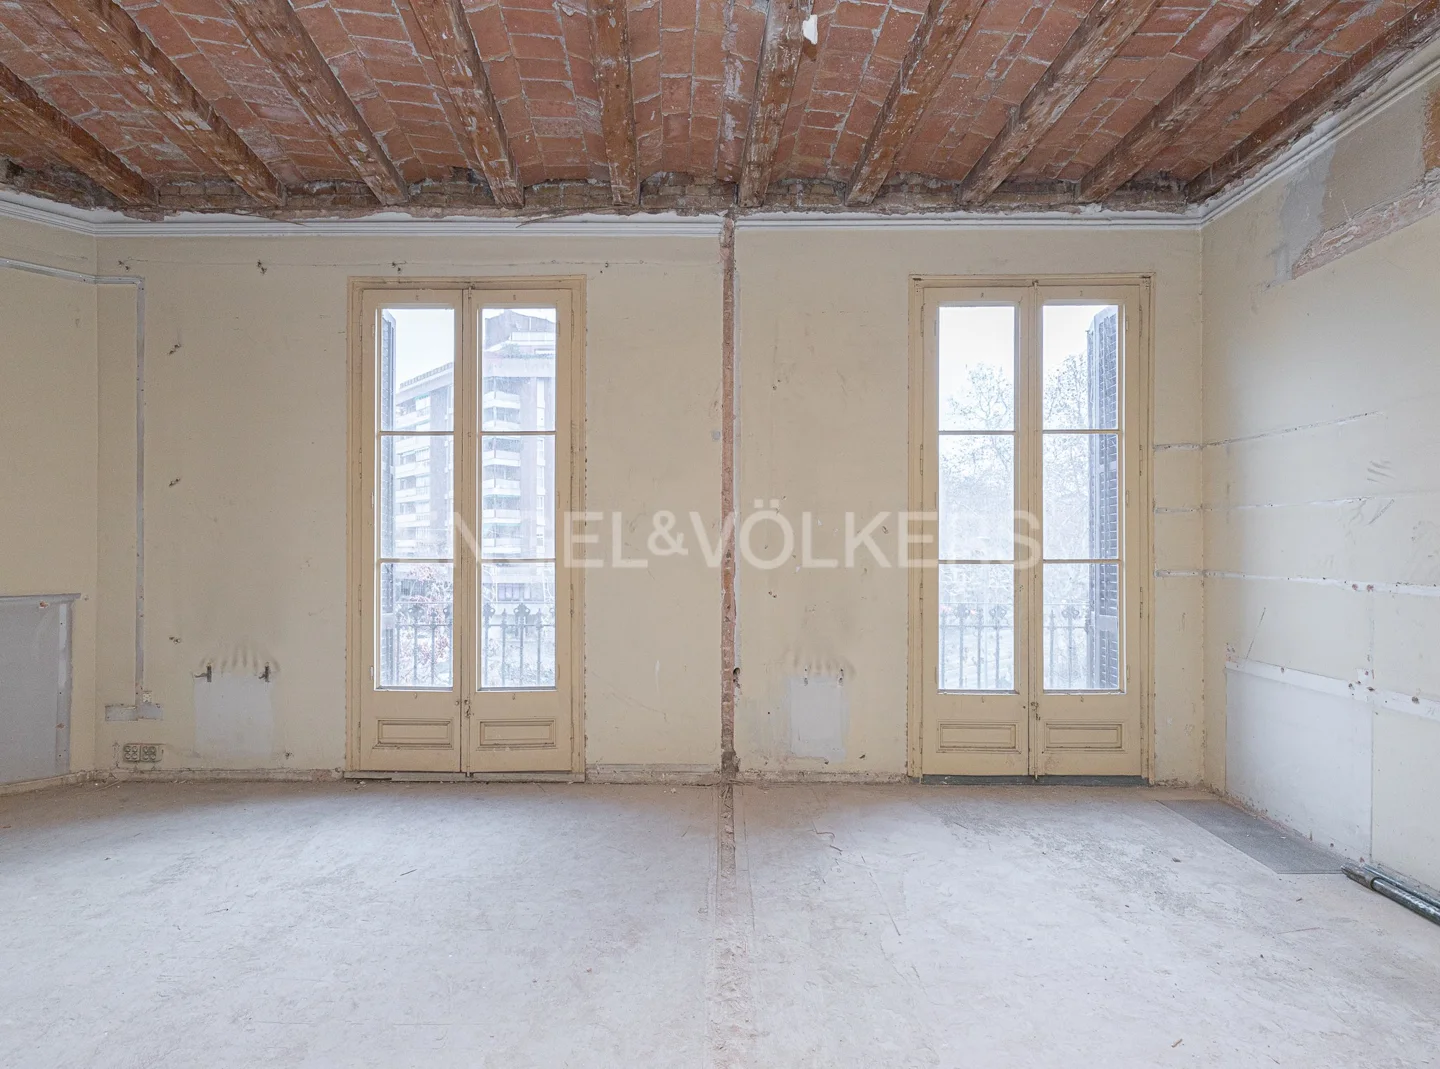 Apartment to renovate in Eixample on Passeig Sant Joan